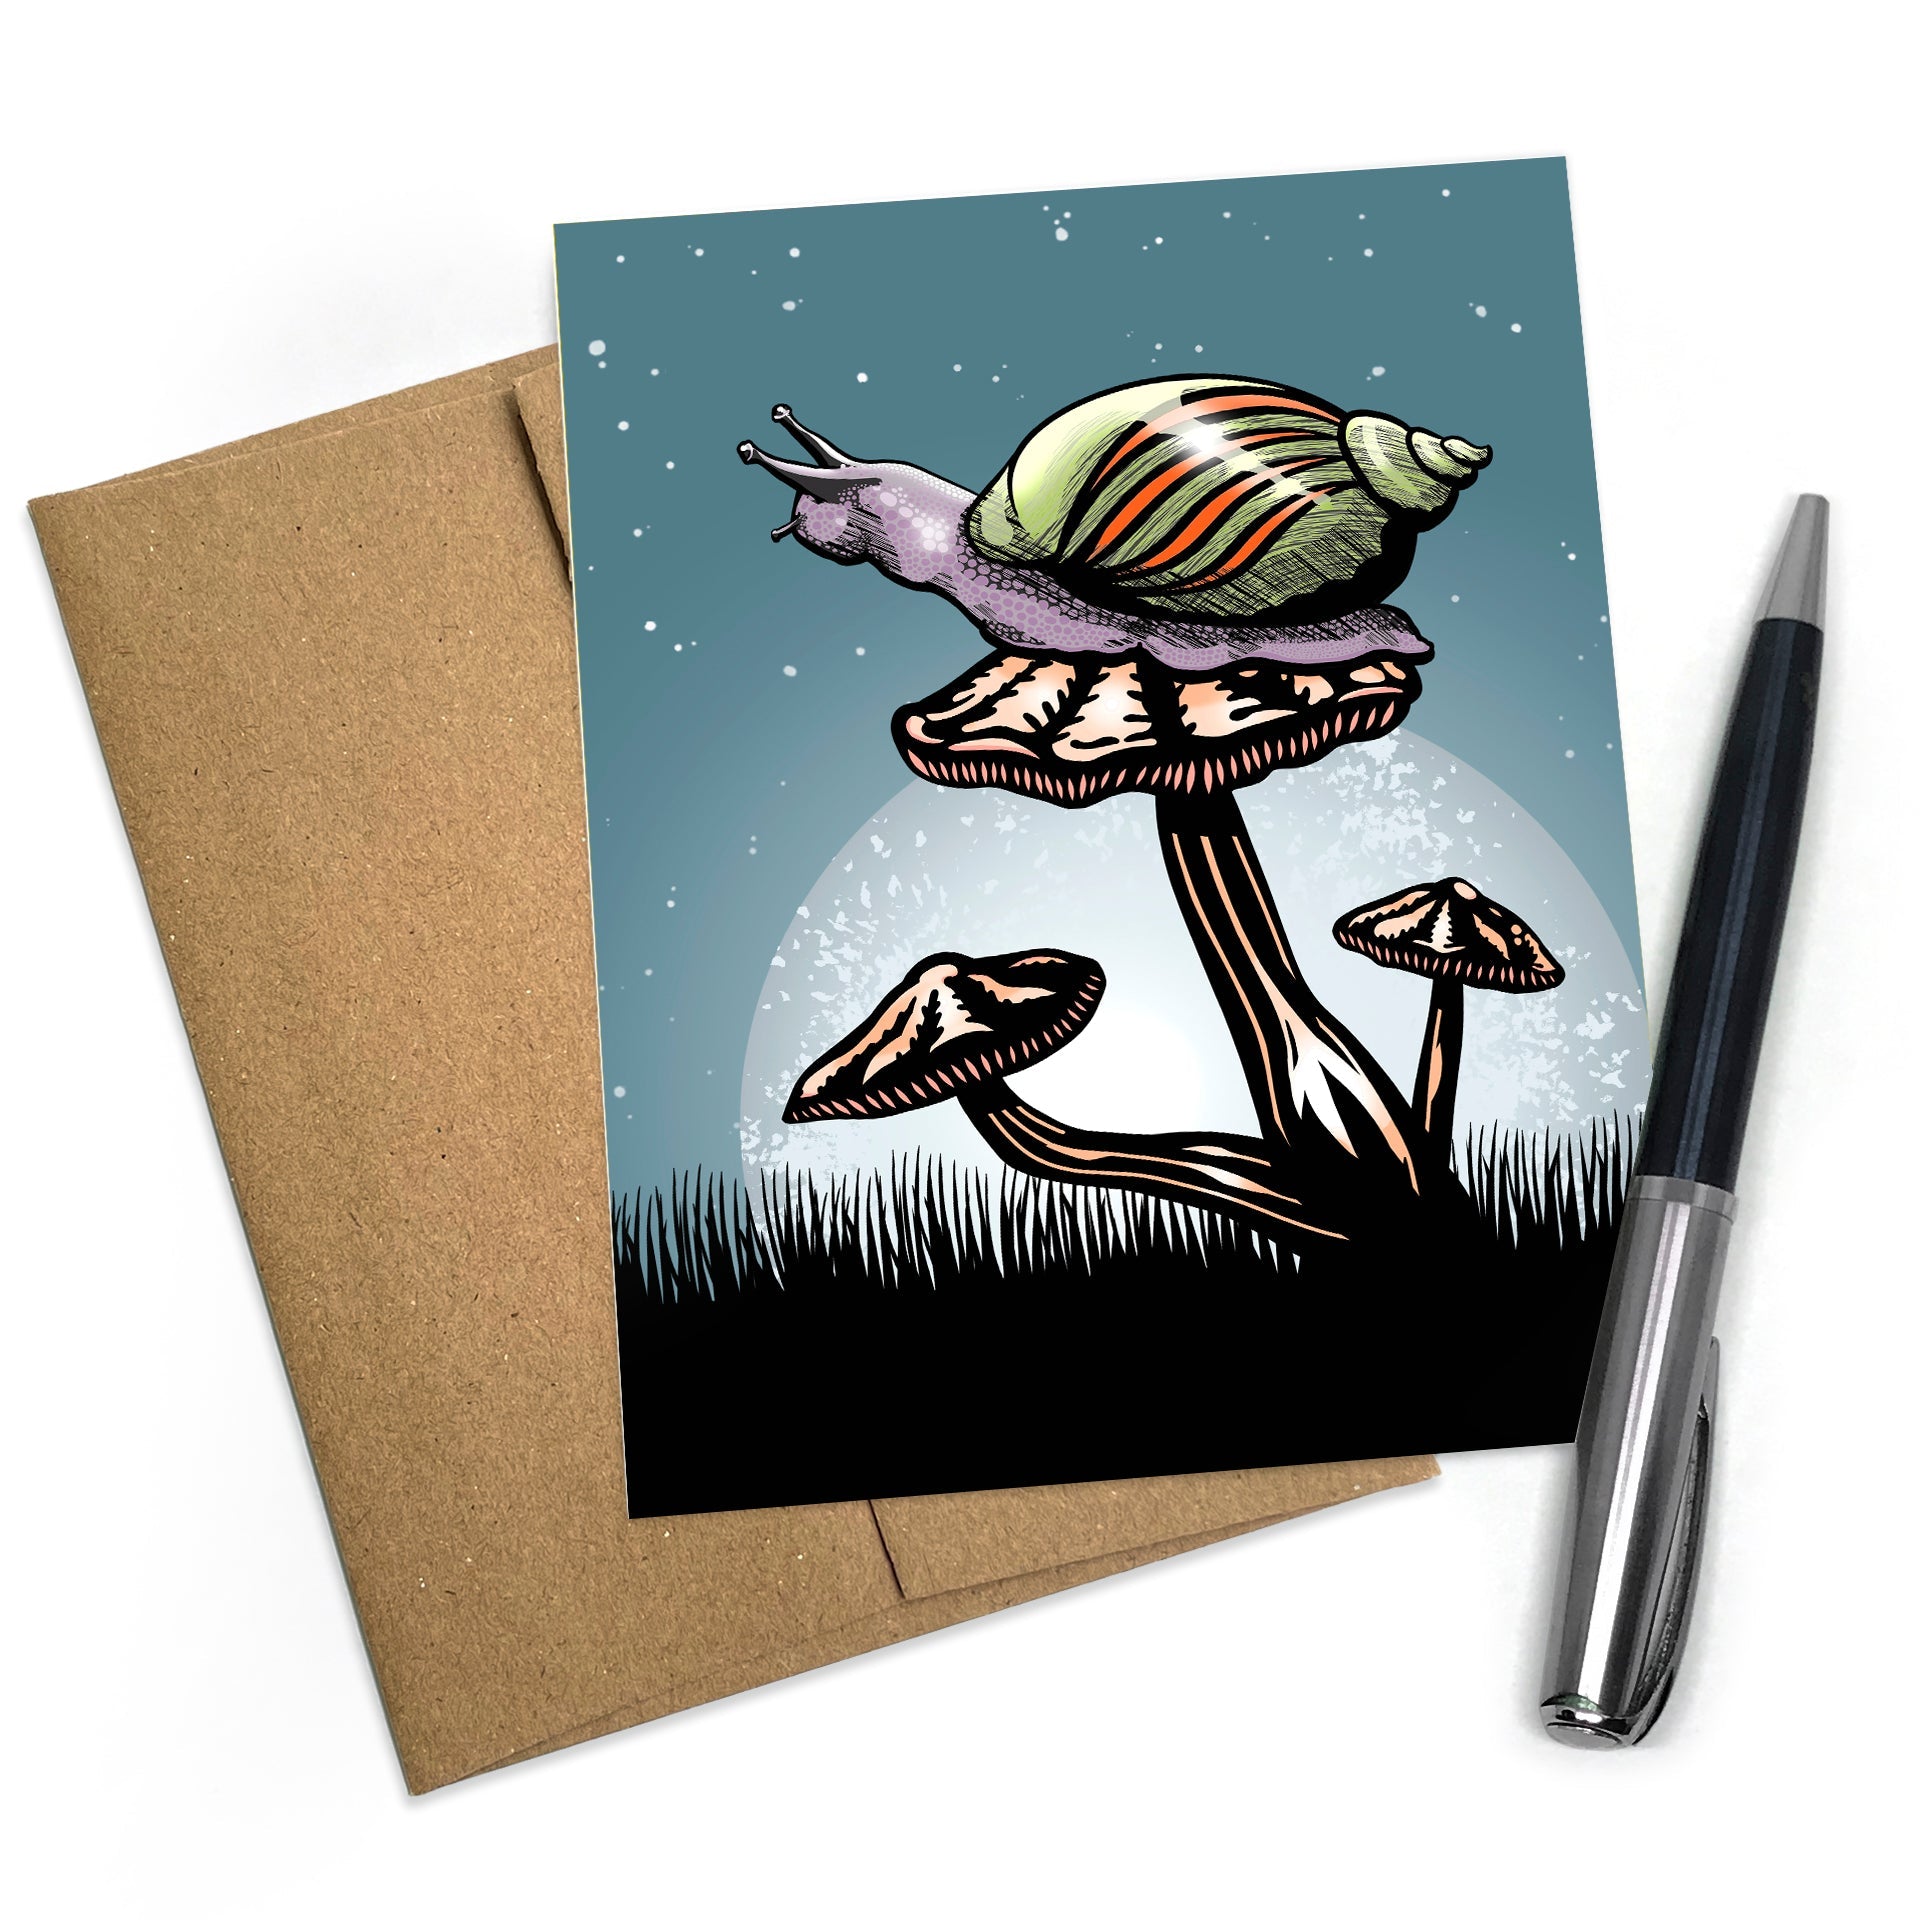 Snail Greeting Card - Greeting Cards - Two Little Fruits - Two Little Fruits